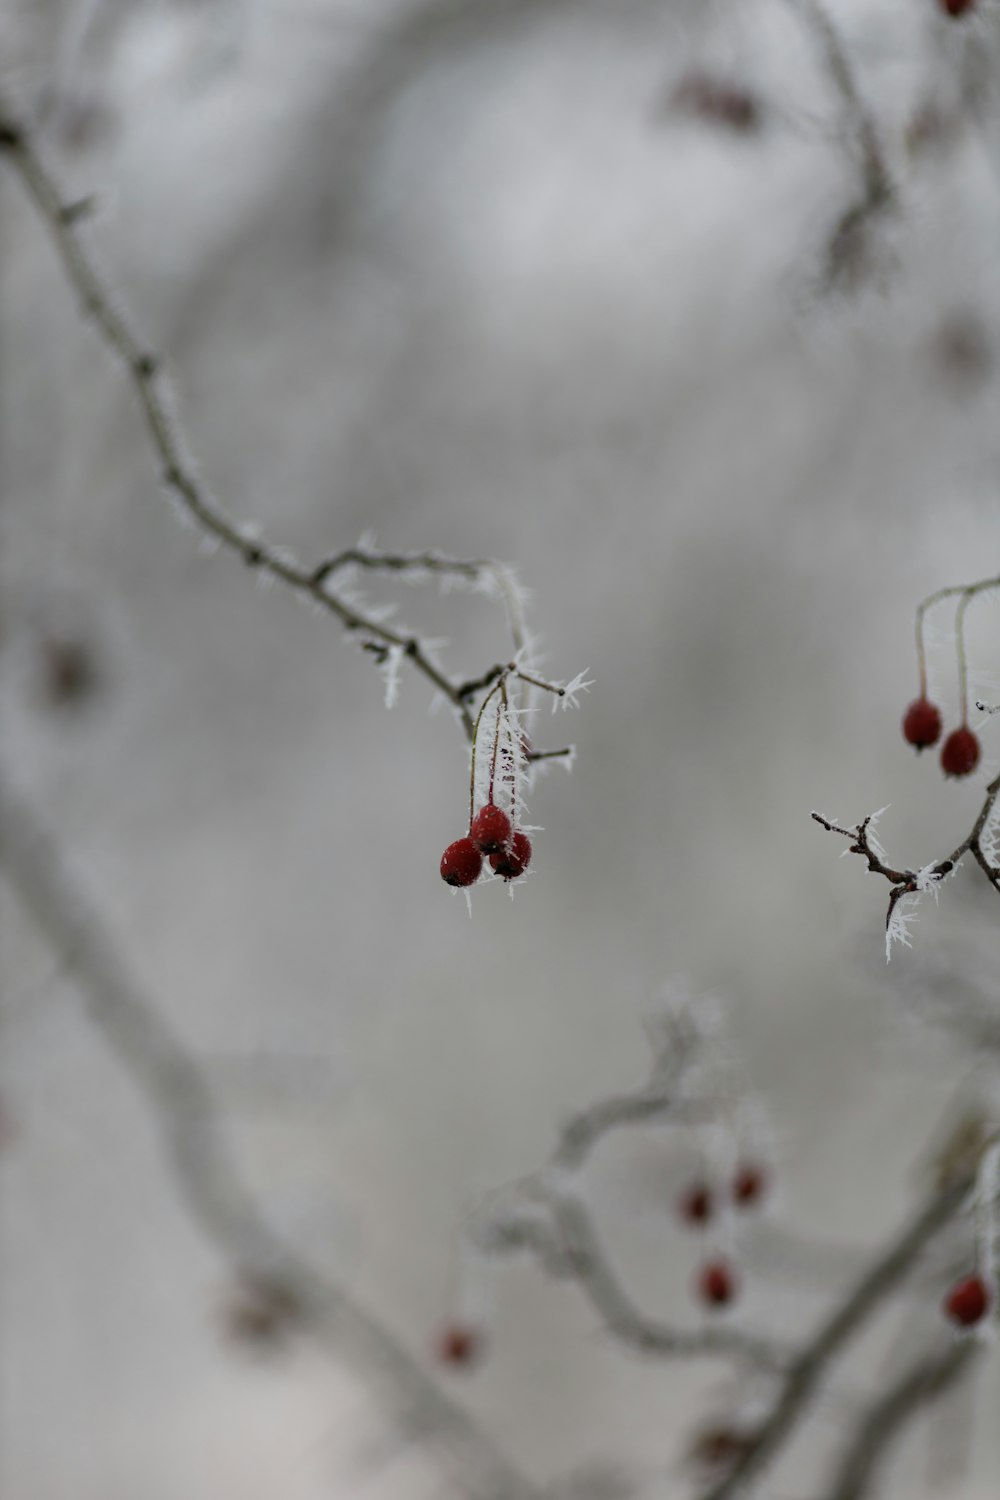 a branch with some berries hanging from it